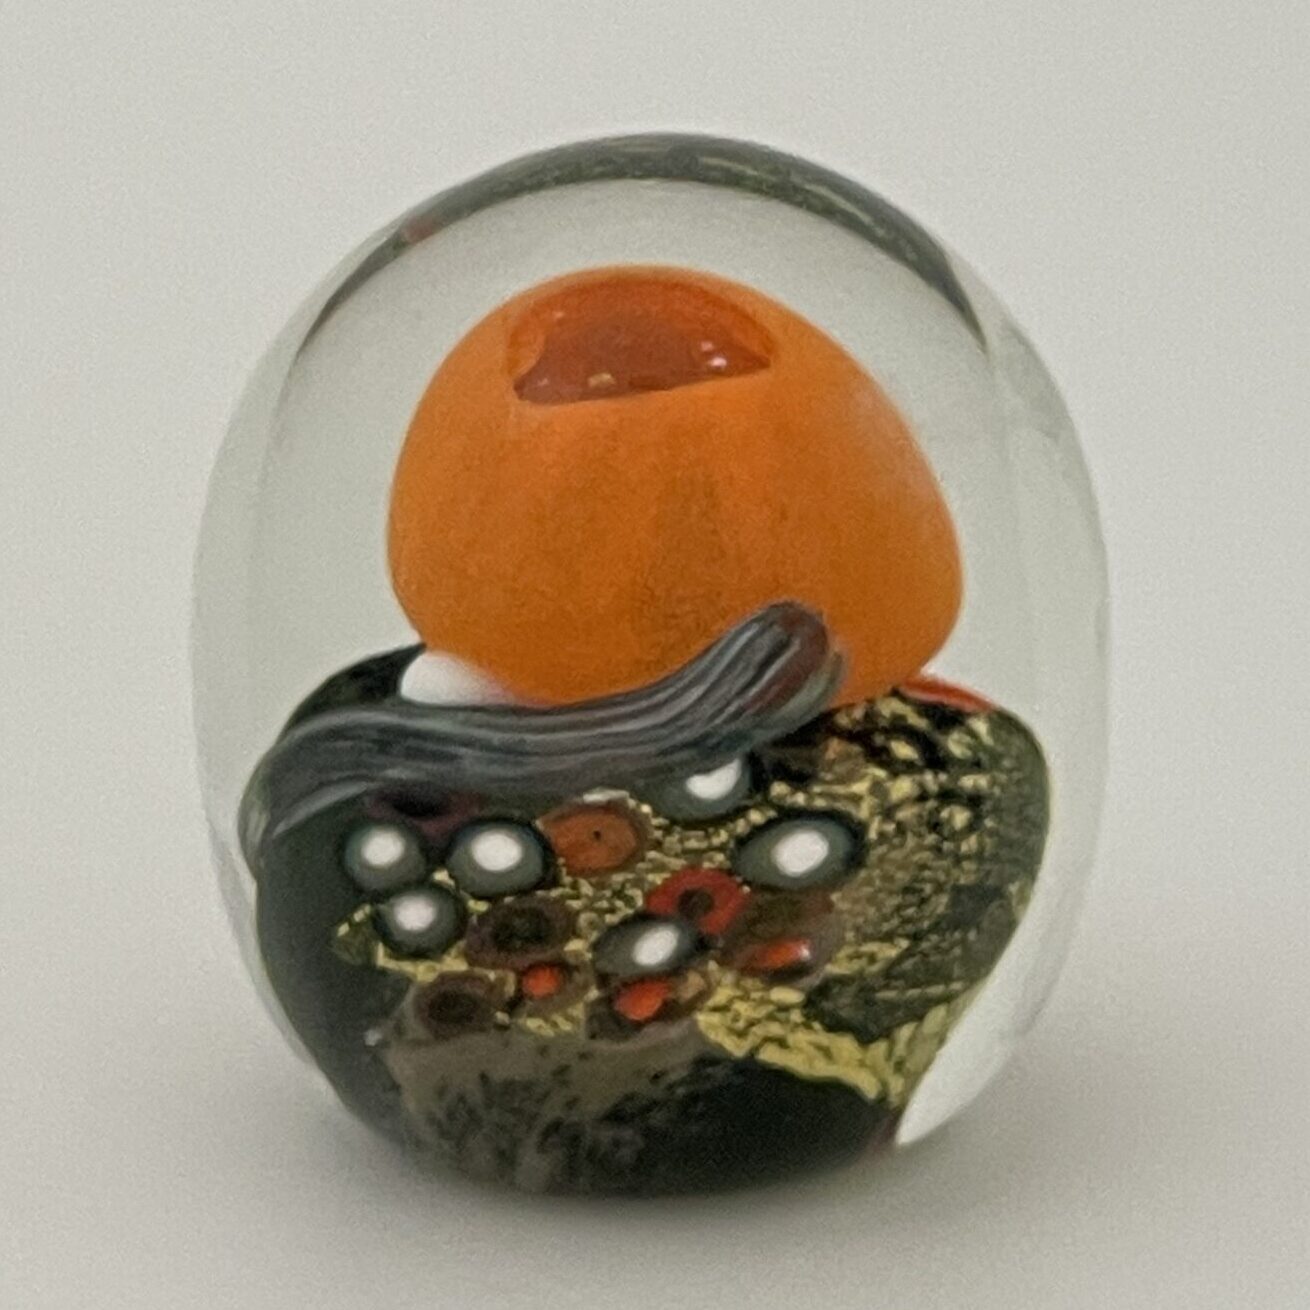 Paperweight from the series Coral Reef by Barry Davis and Collette Fortin